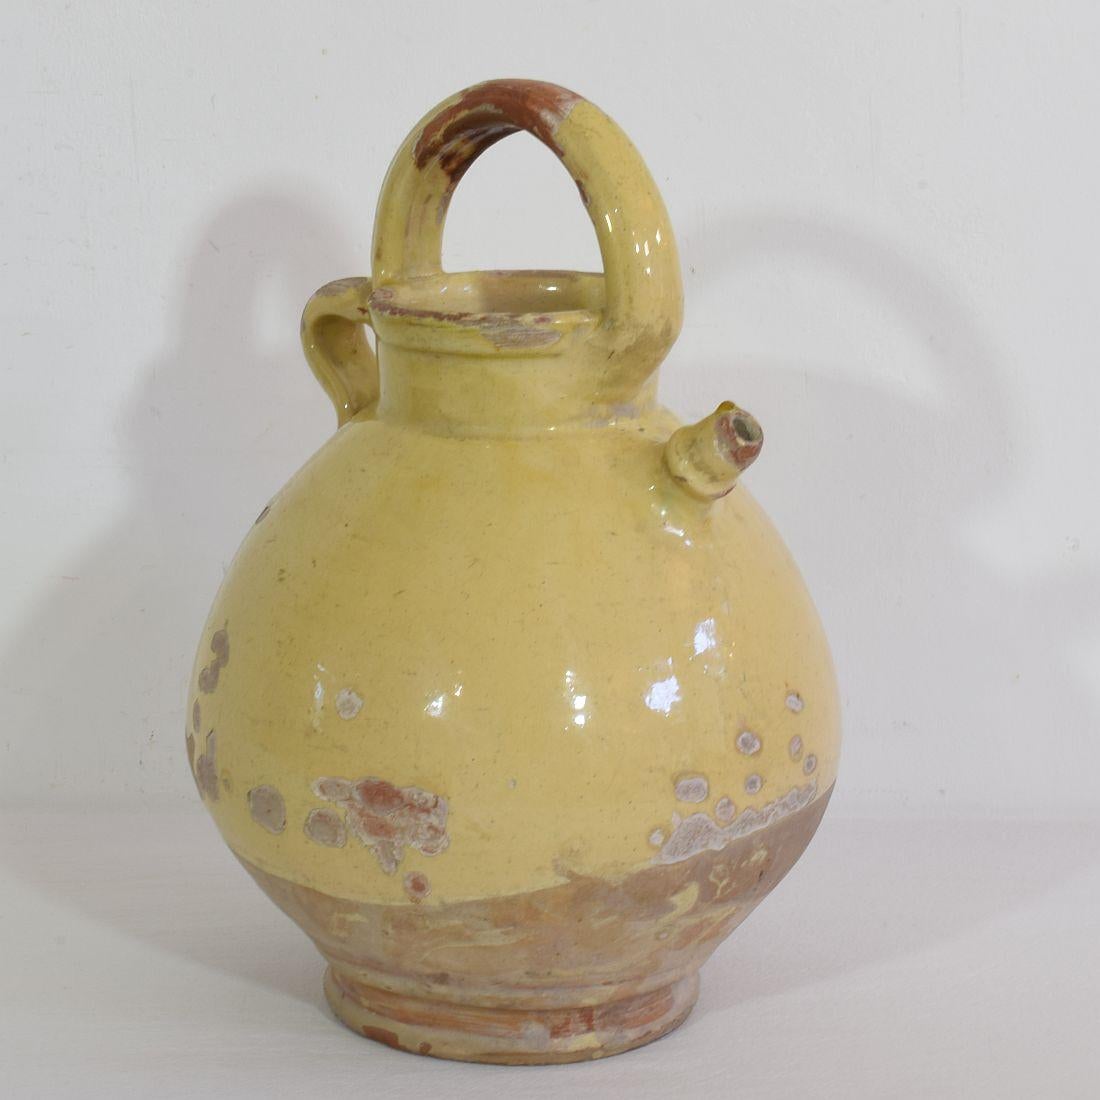 French Provincial 19th Century French Glazed Terracotta Jug or Water Cruche